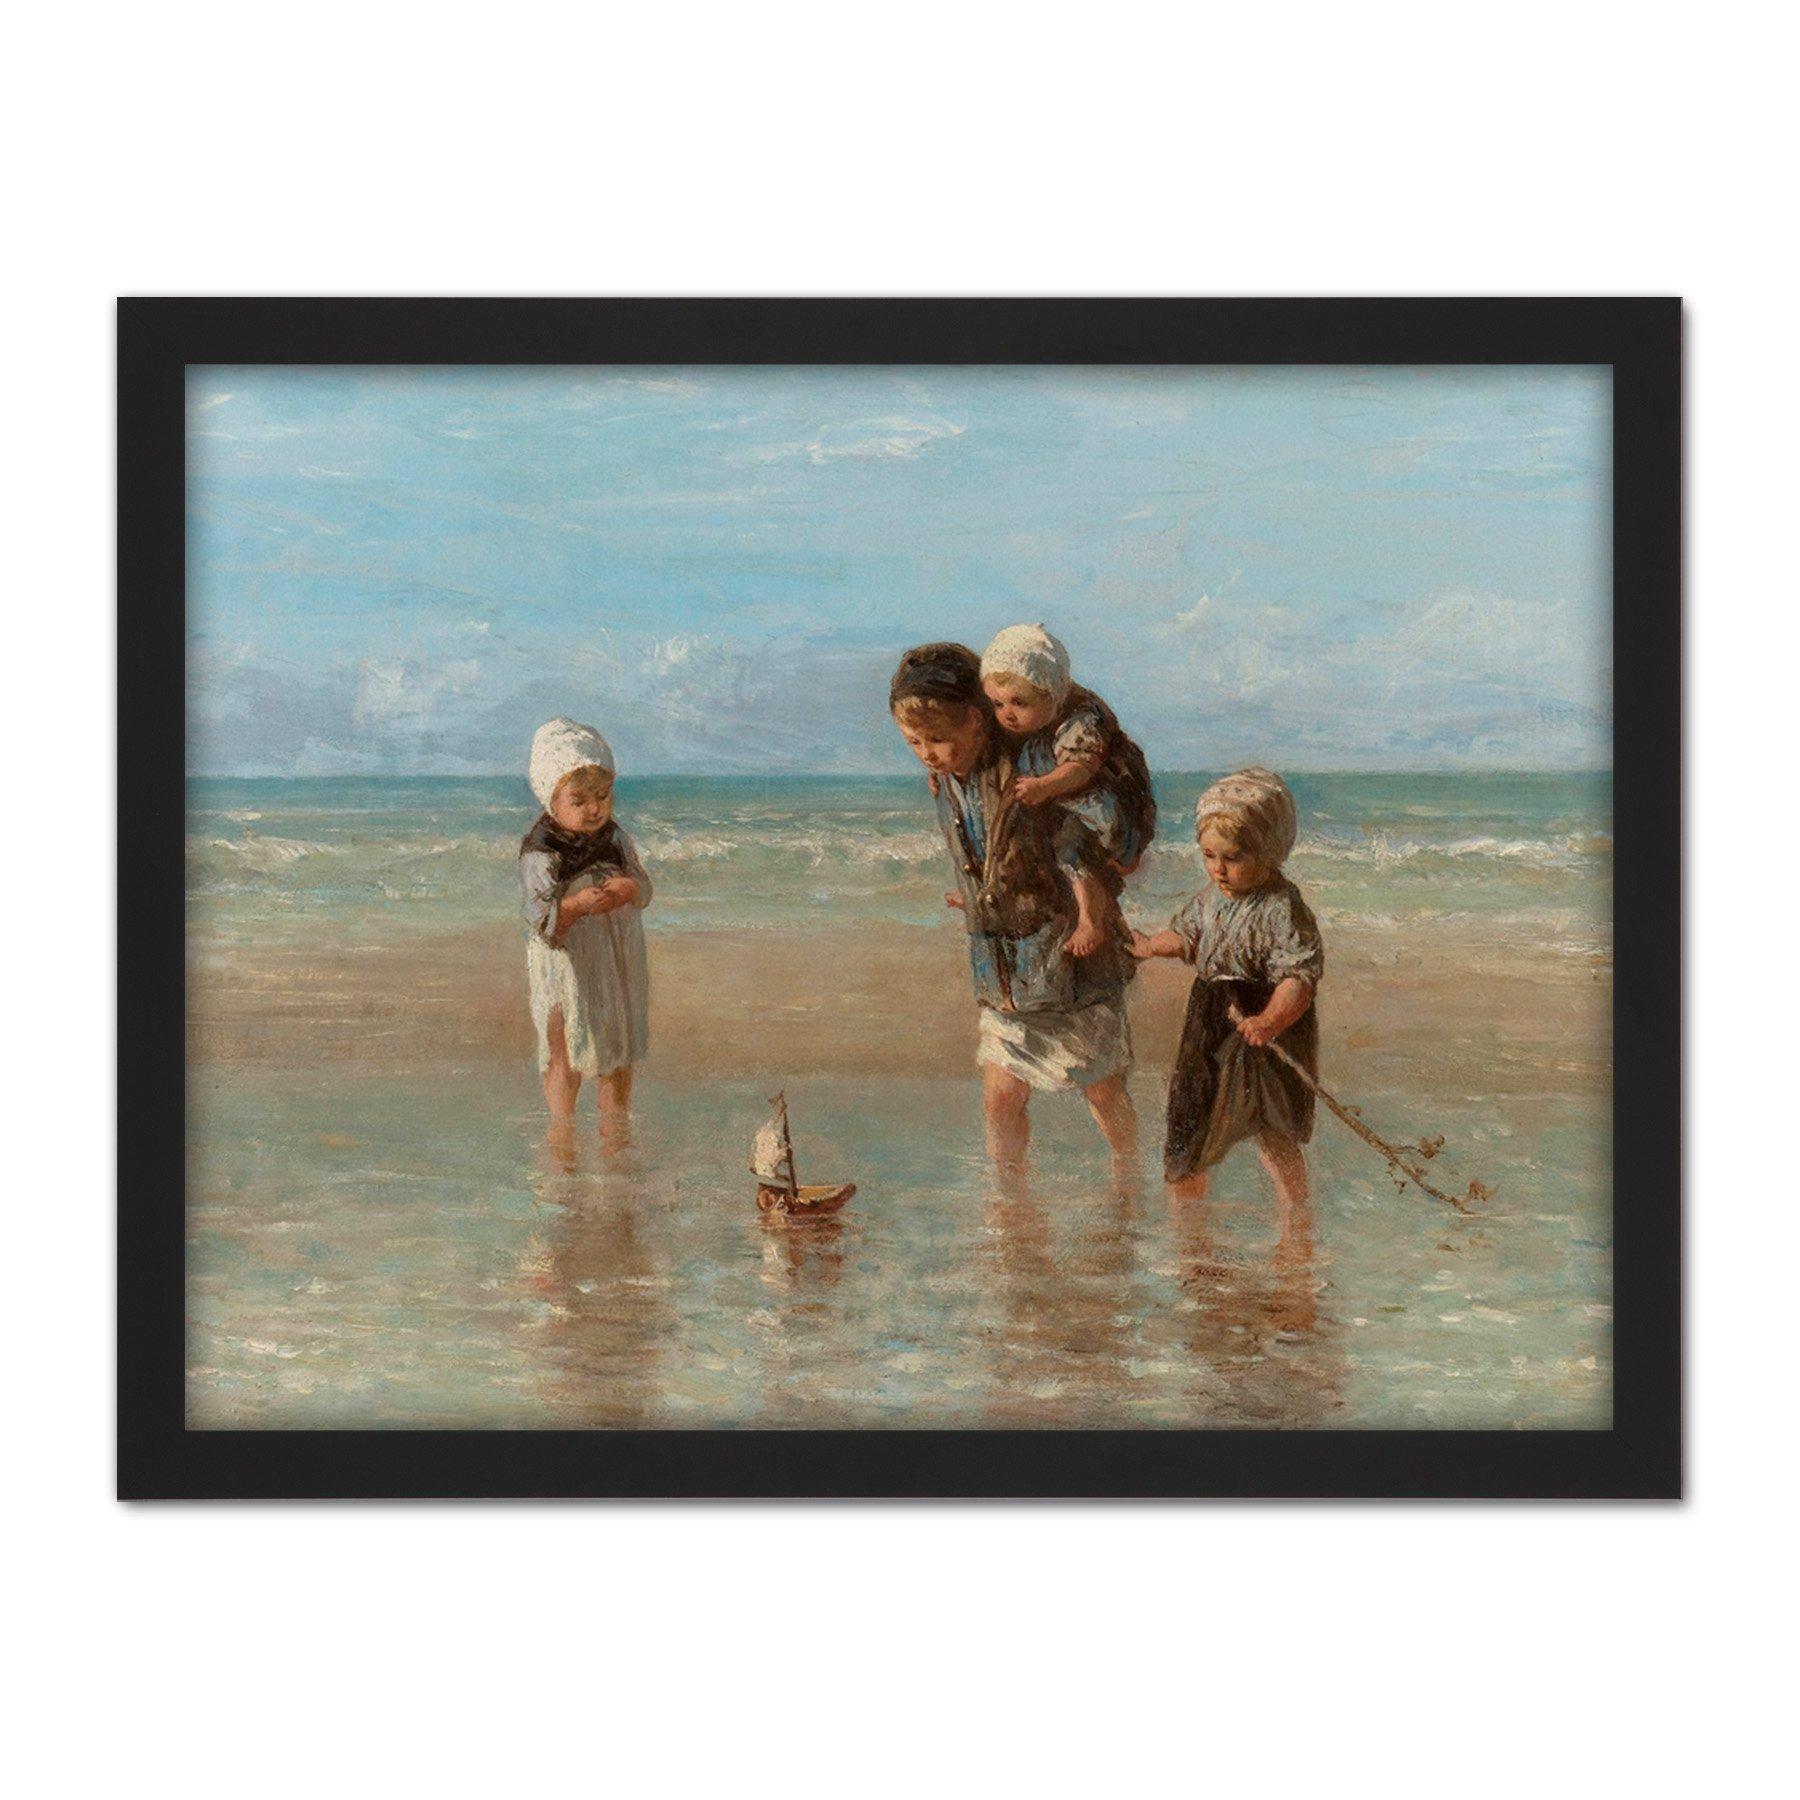 Jozef Israels Children Of The Sea Bathing Painting Large Framed Wall Decor Art Print